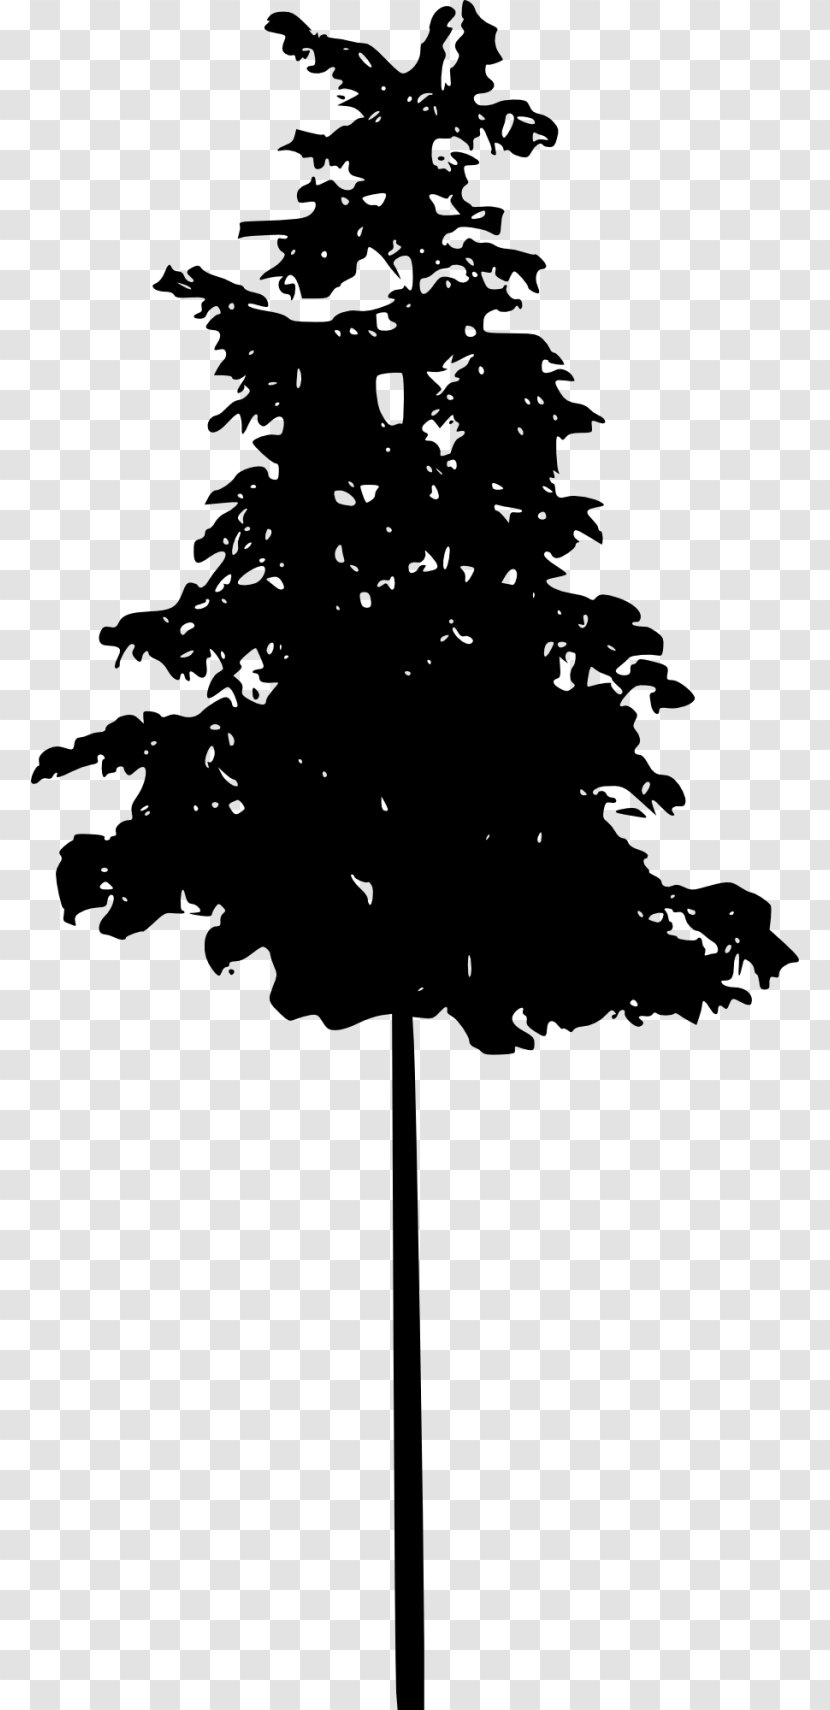 Pine Tree Spruce Conifers - Evergreen - Silhouette Transparent PNG